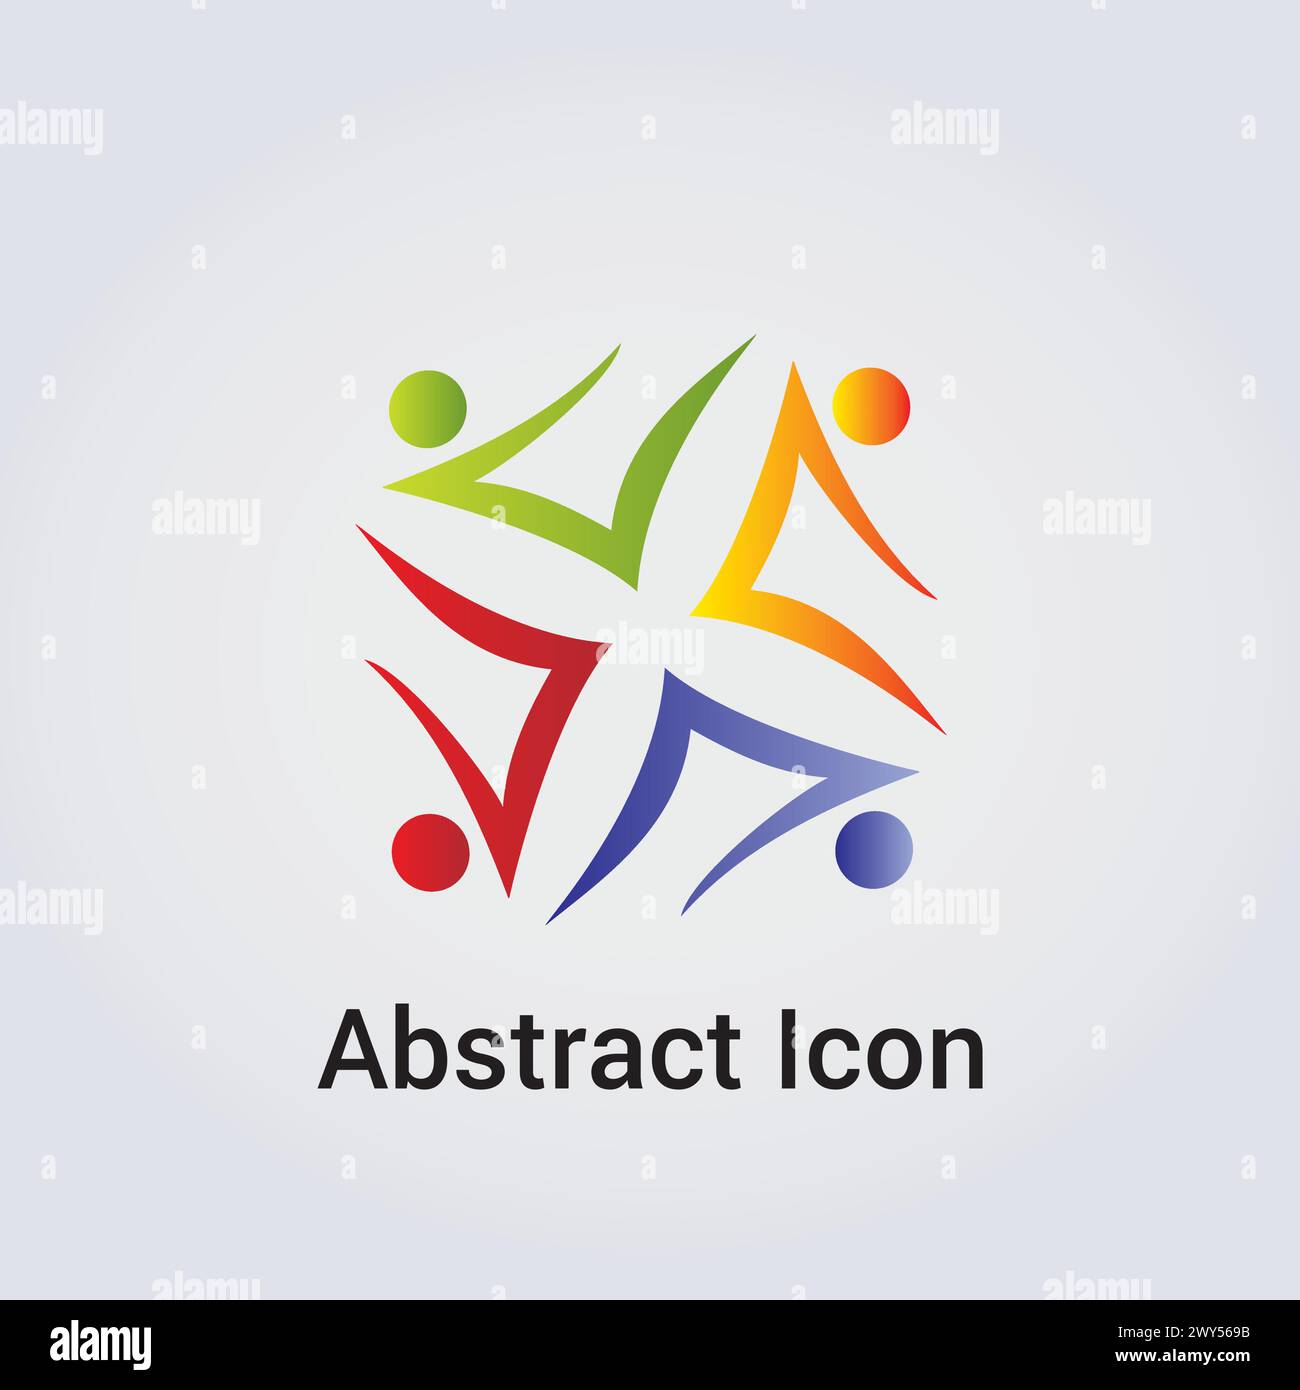 Abstract Icon Logo Design Primary Shapes Silhouettes People Dance Star Circle Clover Miscellaneous Communications Network Rainbow Colors Vector Stock Vector